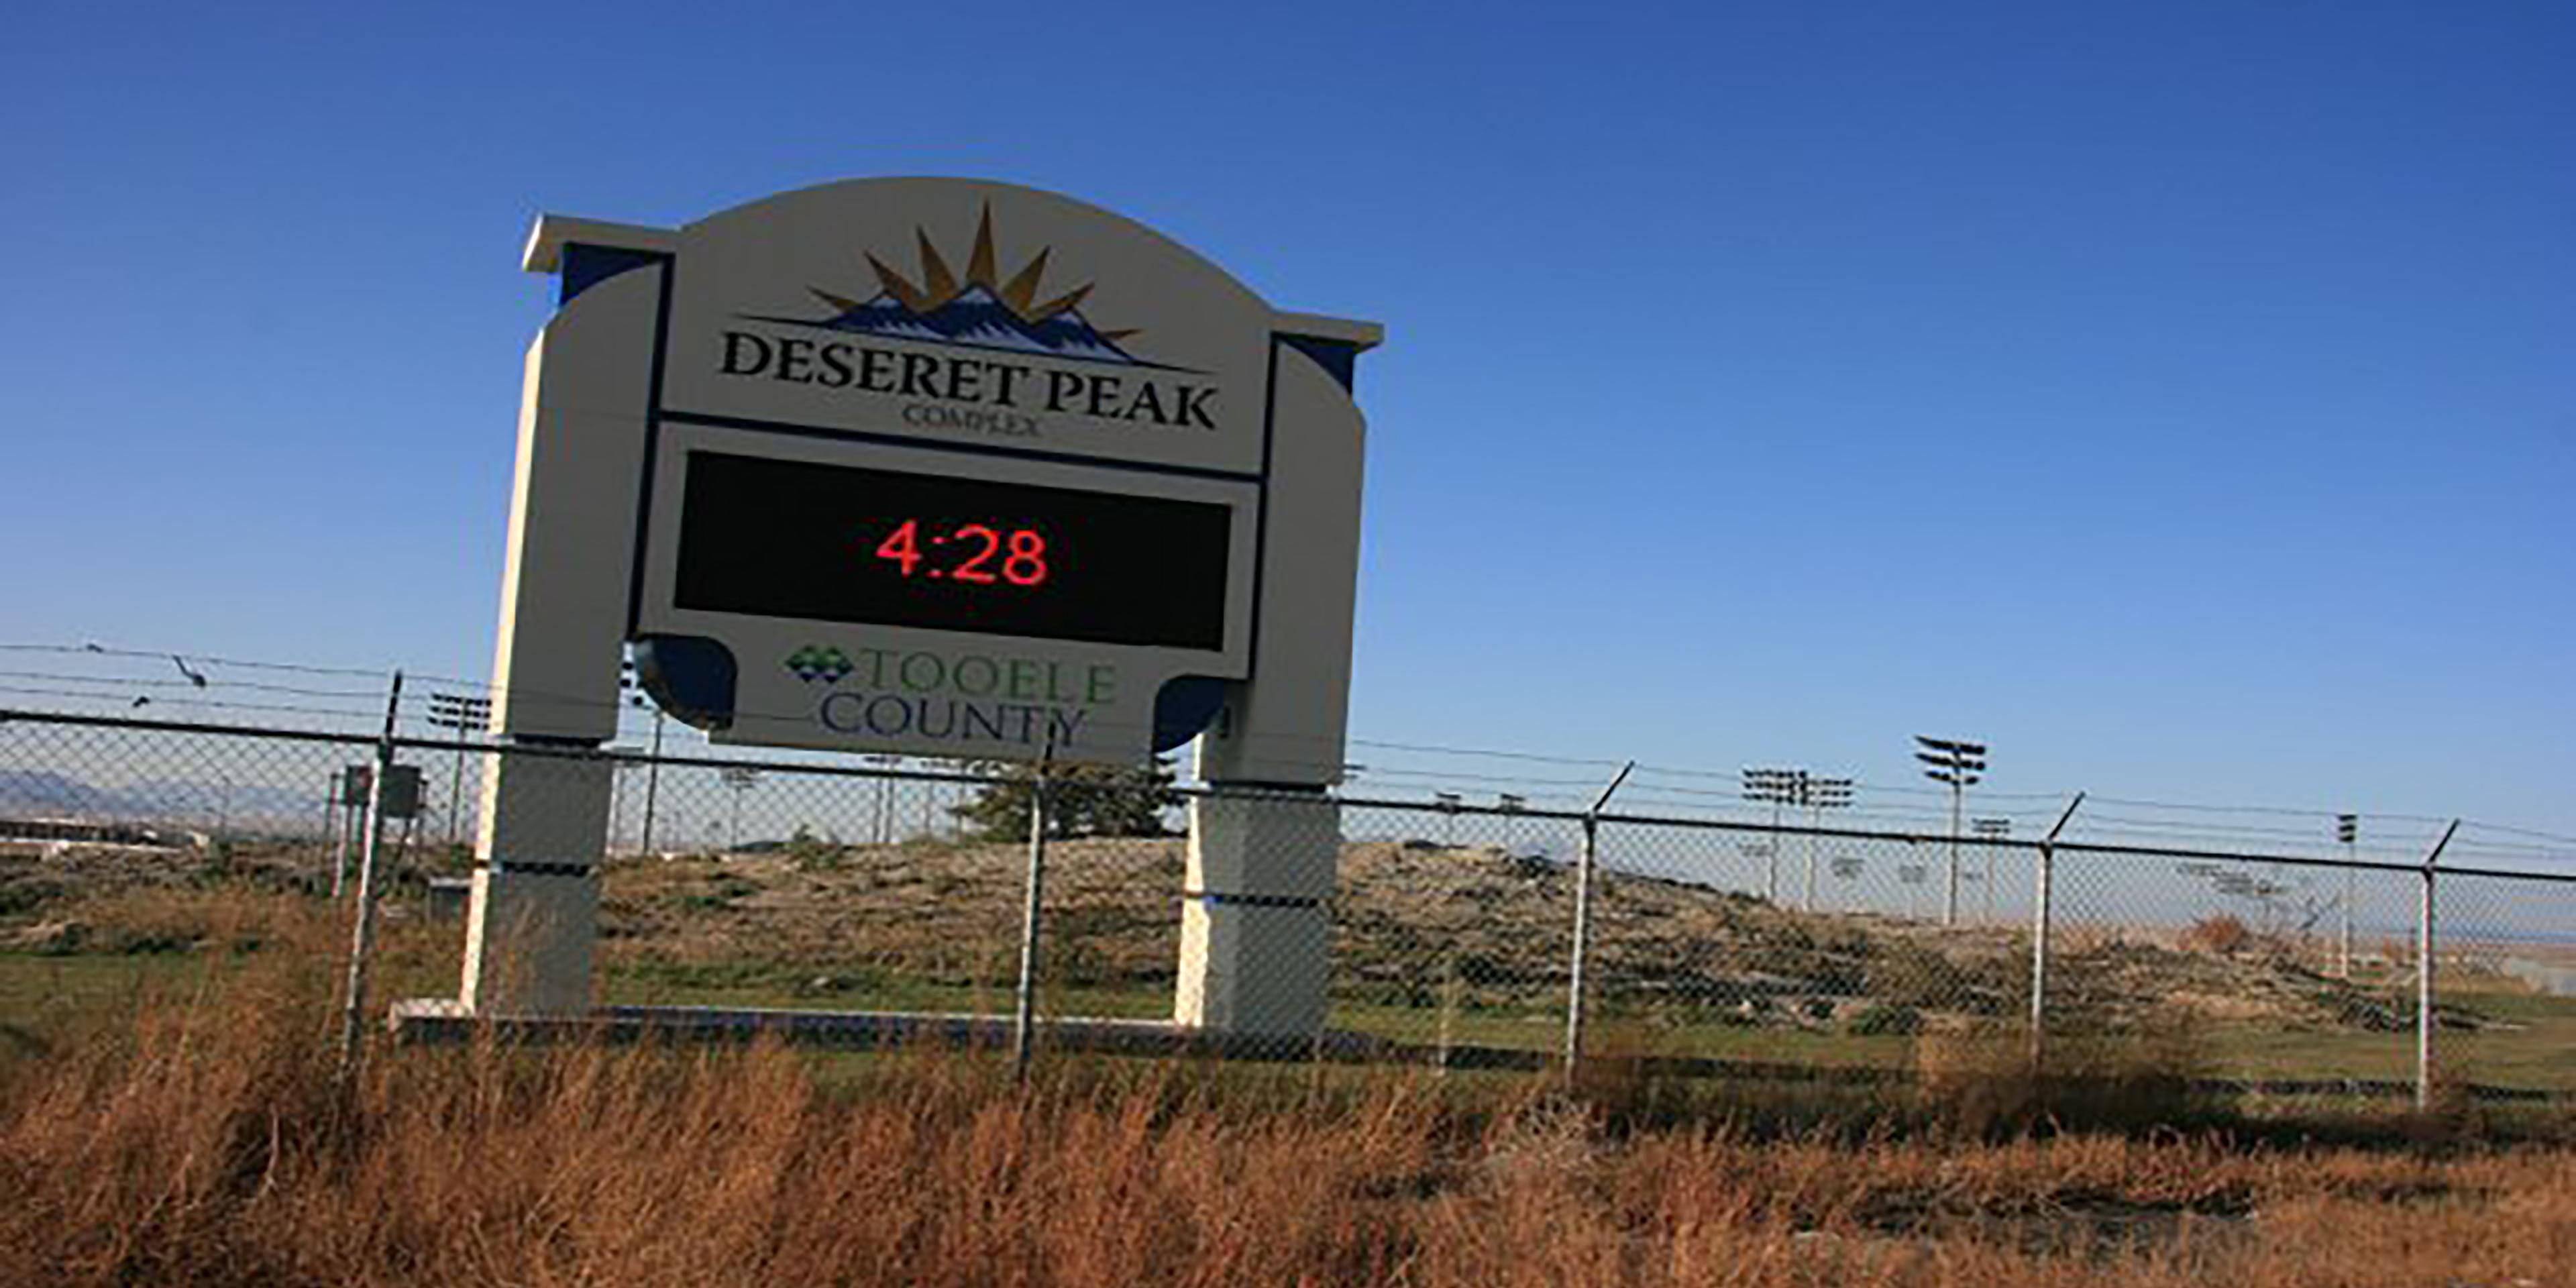 Deseret Peak is home to spectacular events including Country Fan Fest, Motocross, Bit n Spur Rodeo, and BMX.